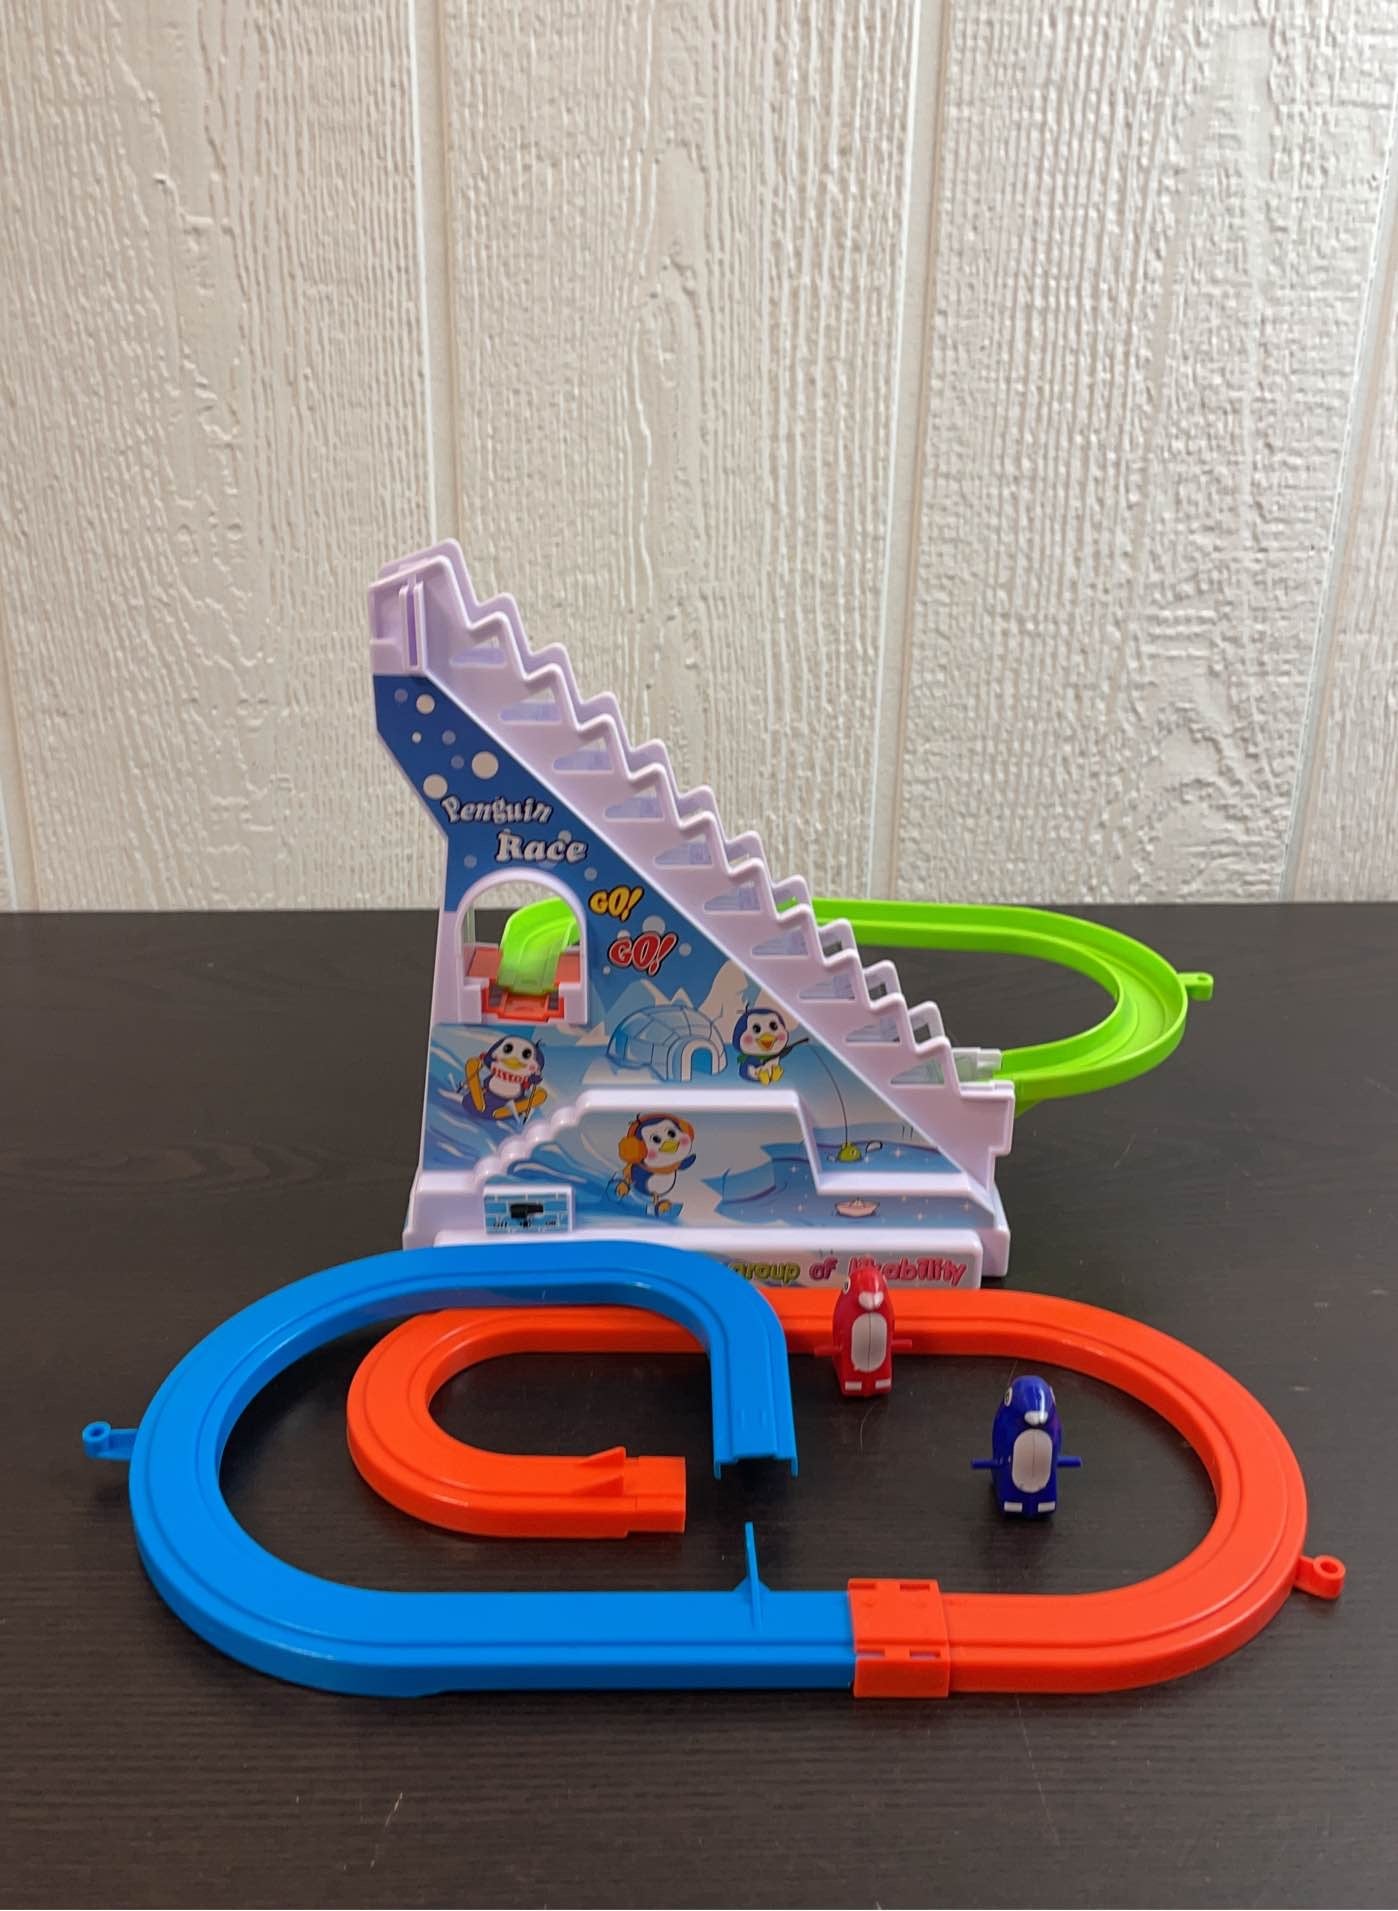 Toys For Kids Penguin Race Toy, Race Track With Spinning Gear